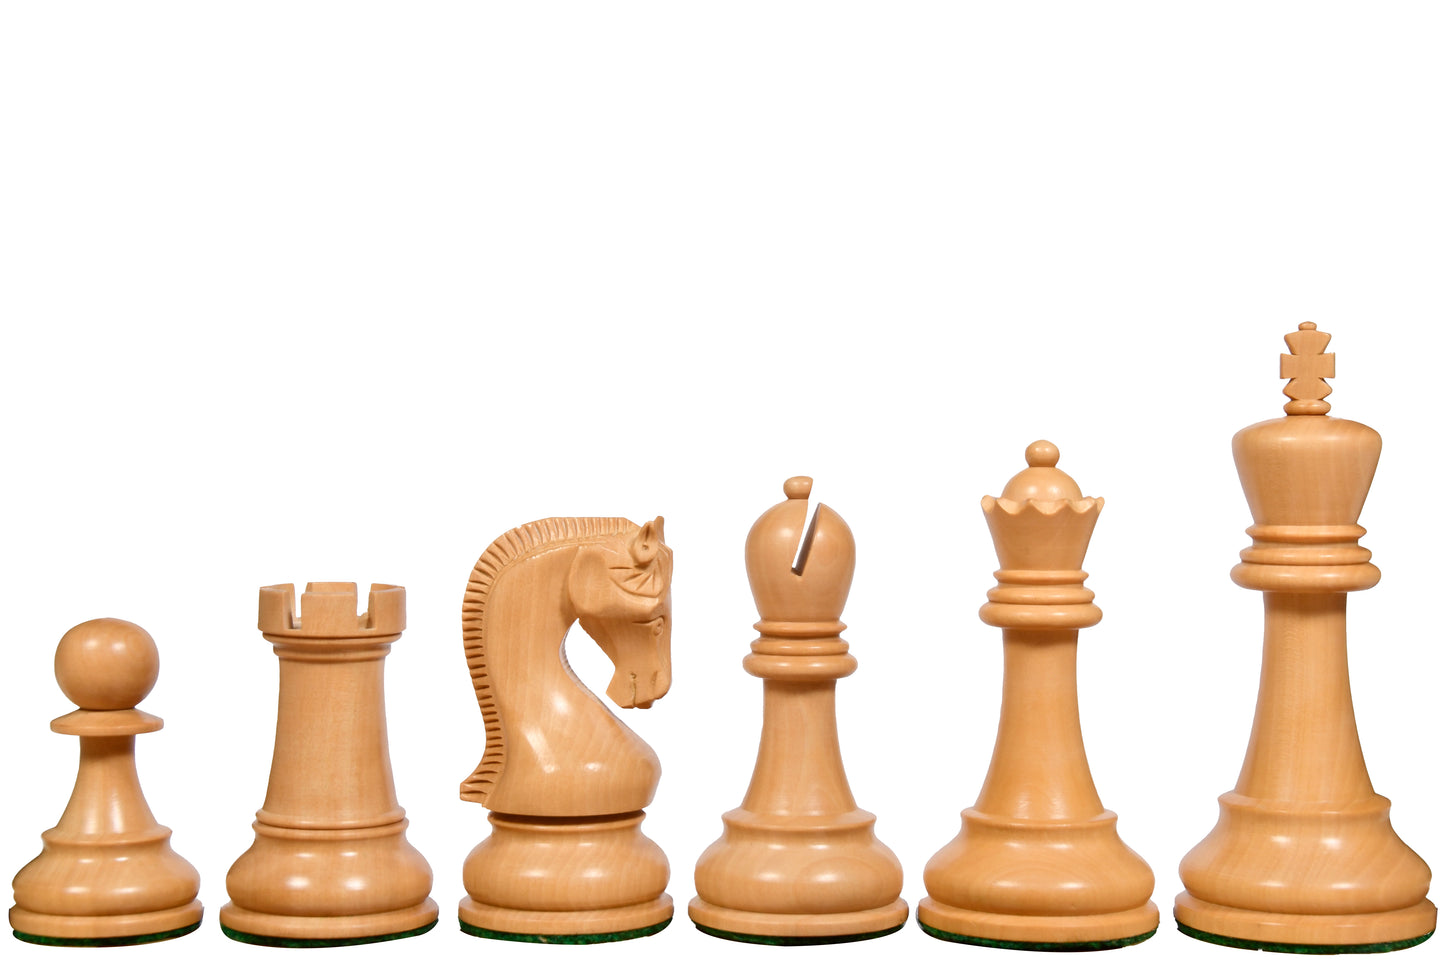 The Leningrad Club-Sized Wooden Chess Pieces in Indian Rosewood & Boxwood- 4.0" King